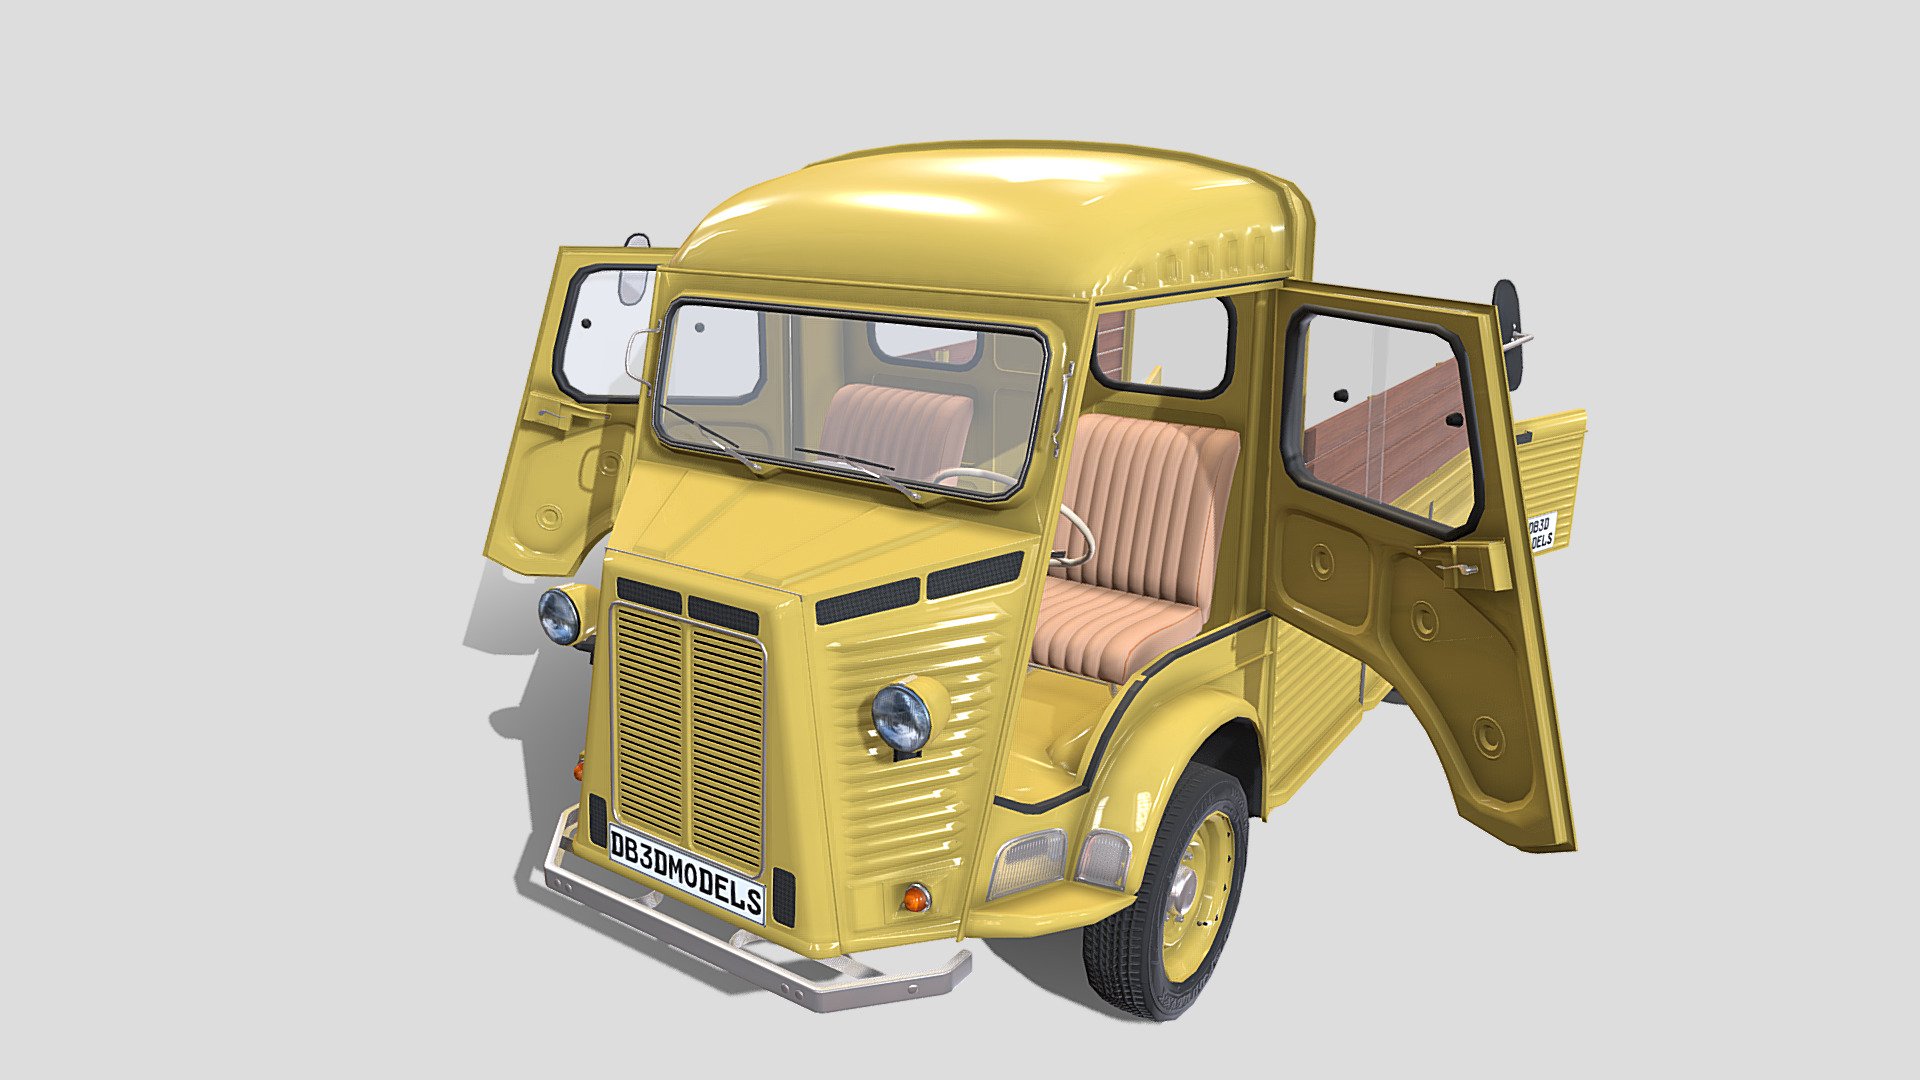 Highly detailed Generic 40s Van 3D model rendered with Cycles in Blender, as per seen on attached images.

The model is very intricately built, it has the interior modeled, with the rear cargo area, and a simple underbody built as well. 

The 3d model is scaled to original size in Blender.

File formats:

-.blend, rendered with cycles, as seen in the images;

-.blend, rendered with cycles, as seen in the images, with doors open;

-.obj, with materials applied;

-.obj, with materials applied, with doors open;

-.dae, with materials applied;

-.dae, with materials applied, with doors open;

-.fbx, with materials applied;

-.fbx, with materials applied, with doors open;

-.stl;

-.stl, with doors open;

Files come named appropriately and split by file format.

3D Software:

The 3D model was originally created in Blender 3.1 and rendered with Cycles 3d model